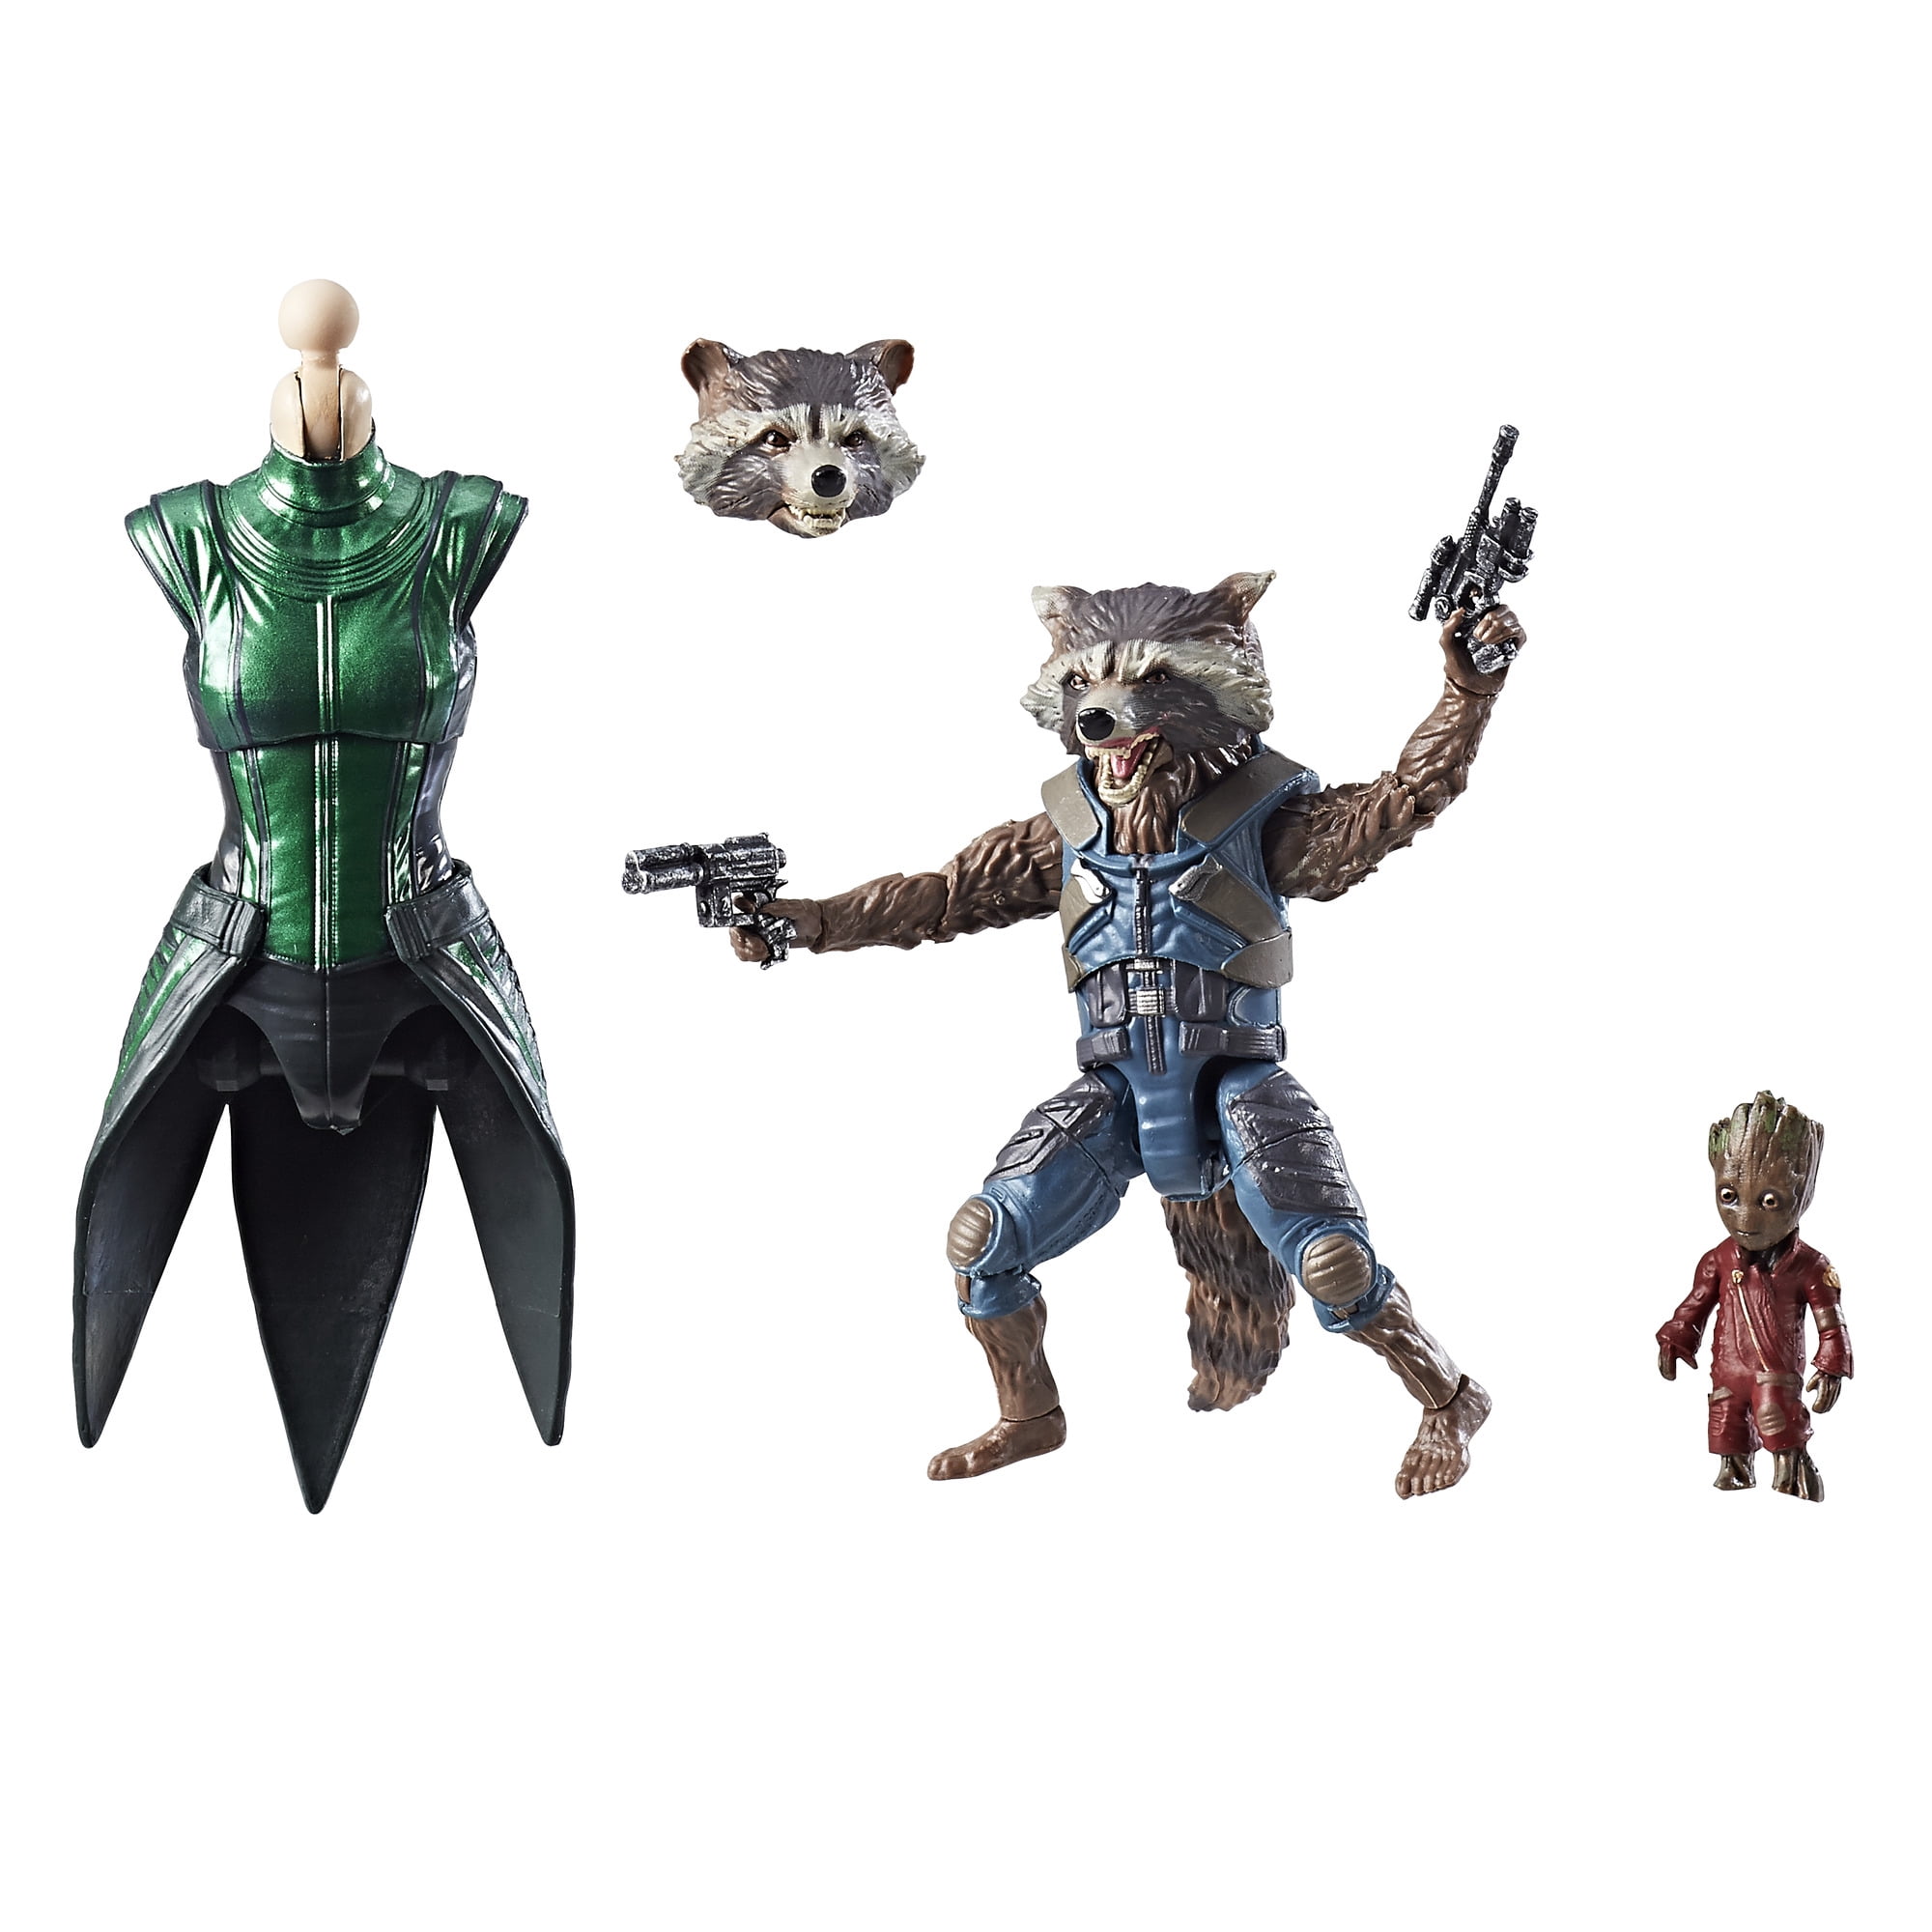 GUARDIANS OF THE GALAXY 2 Star-Lord & Rocket Raccoon Marvel Select Action Figure 